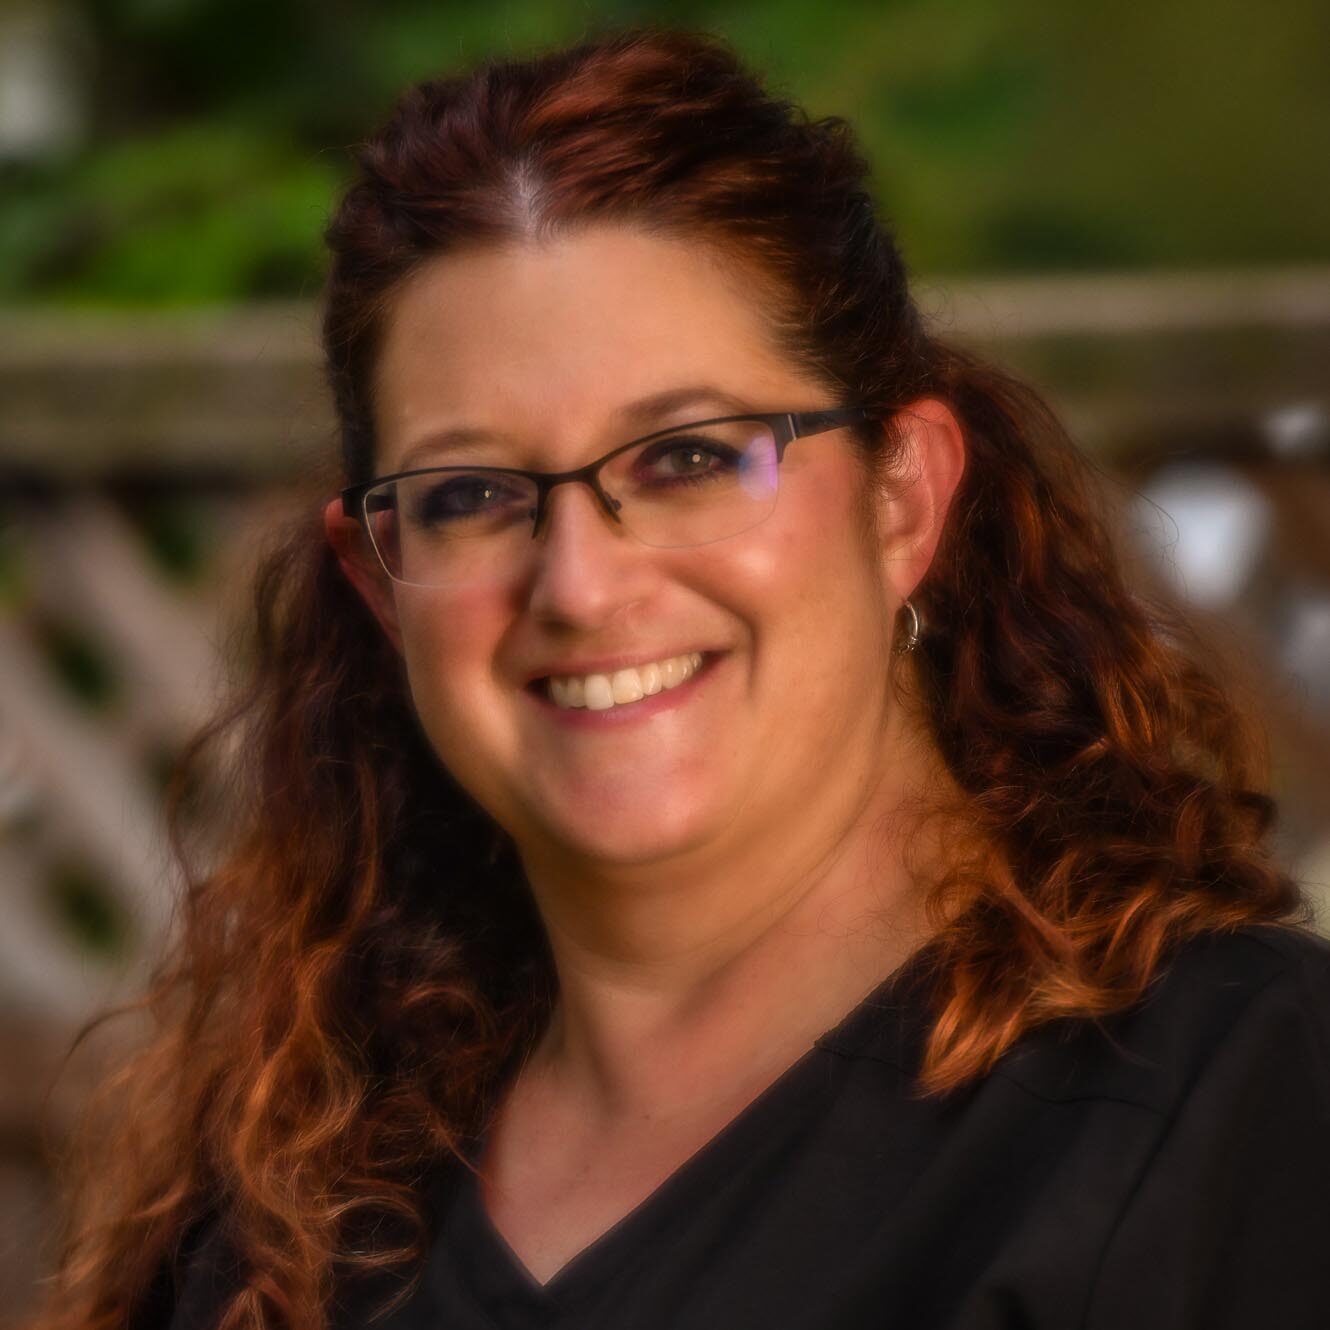 A woman with red hair and glasses smiling, radiating warmth and happiness. She is Lori, Dental Hygienist at Clinton Family Dental.